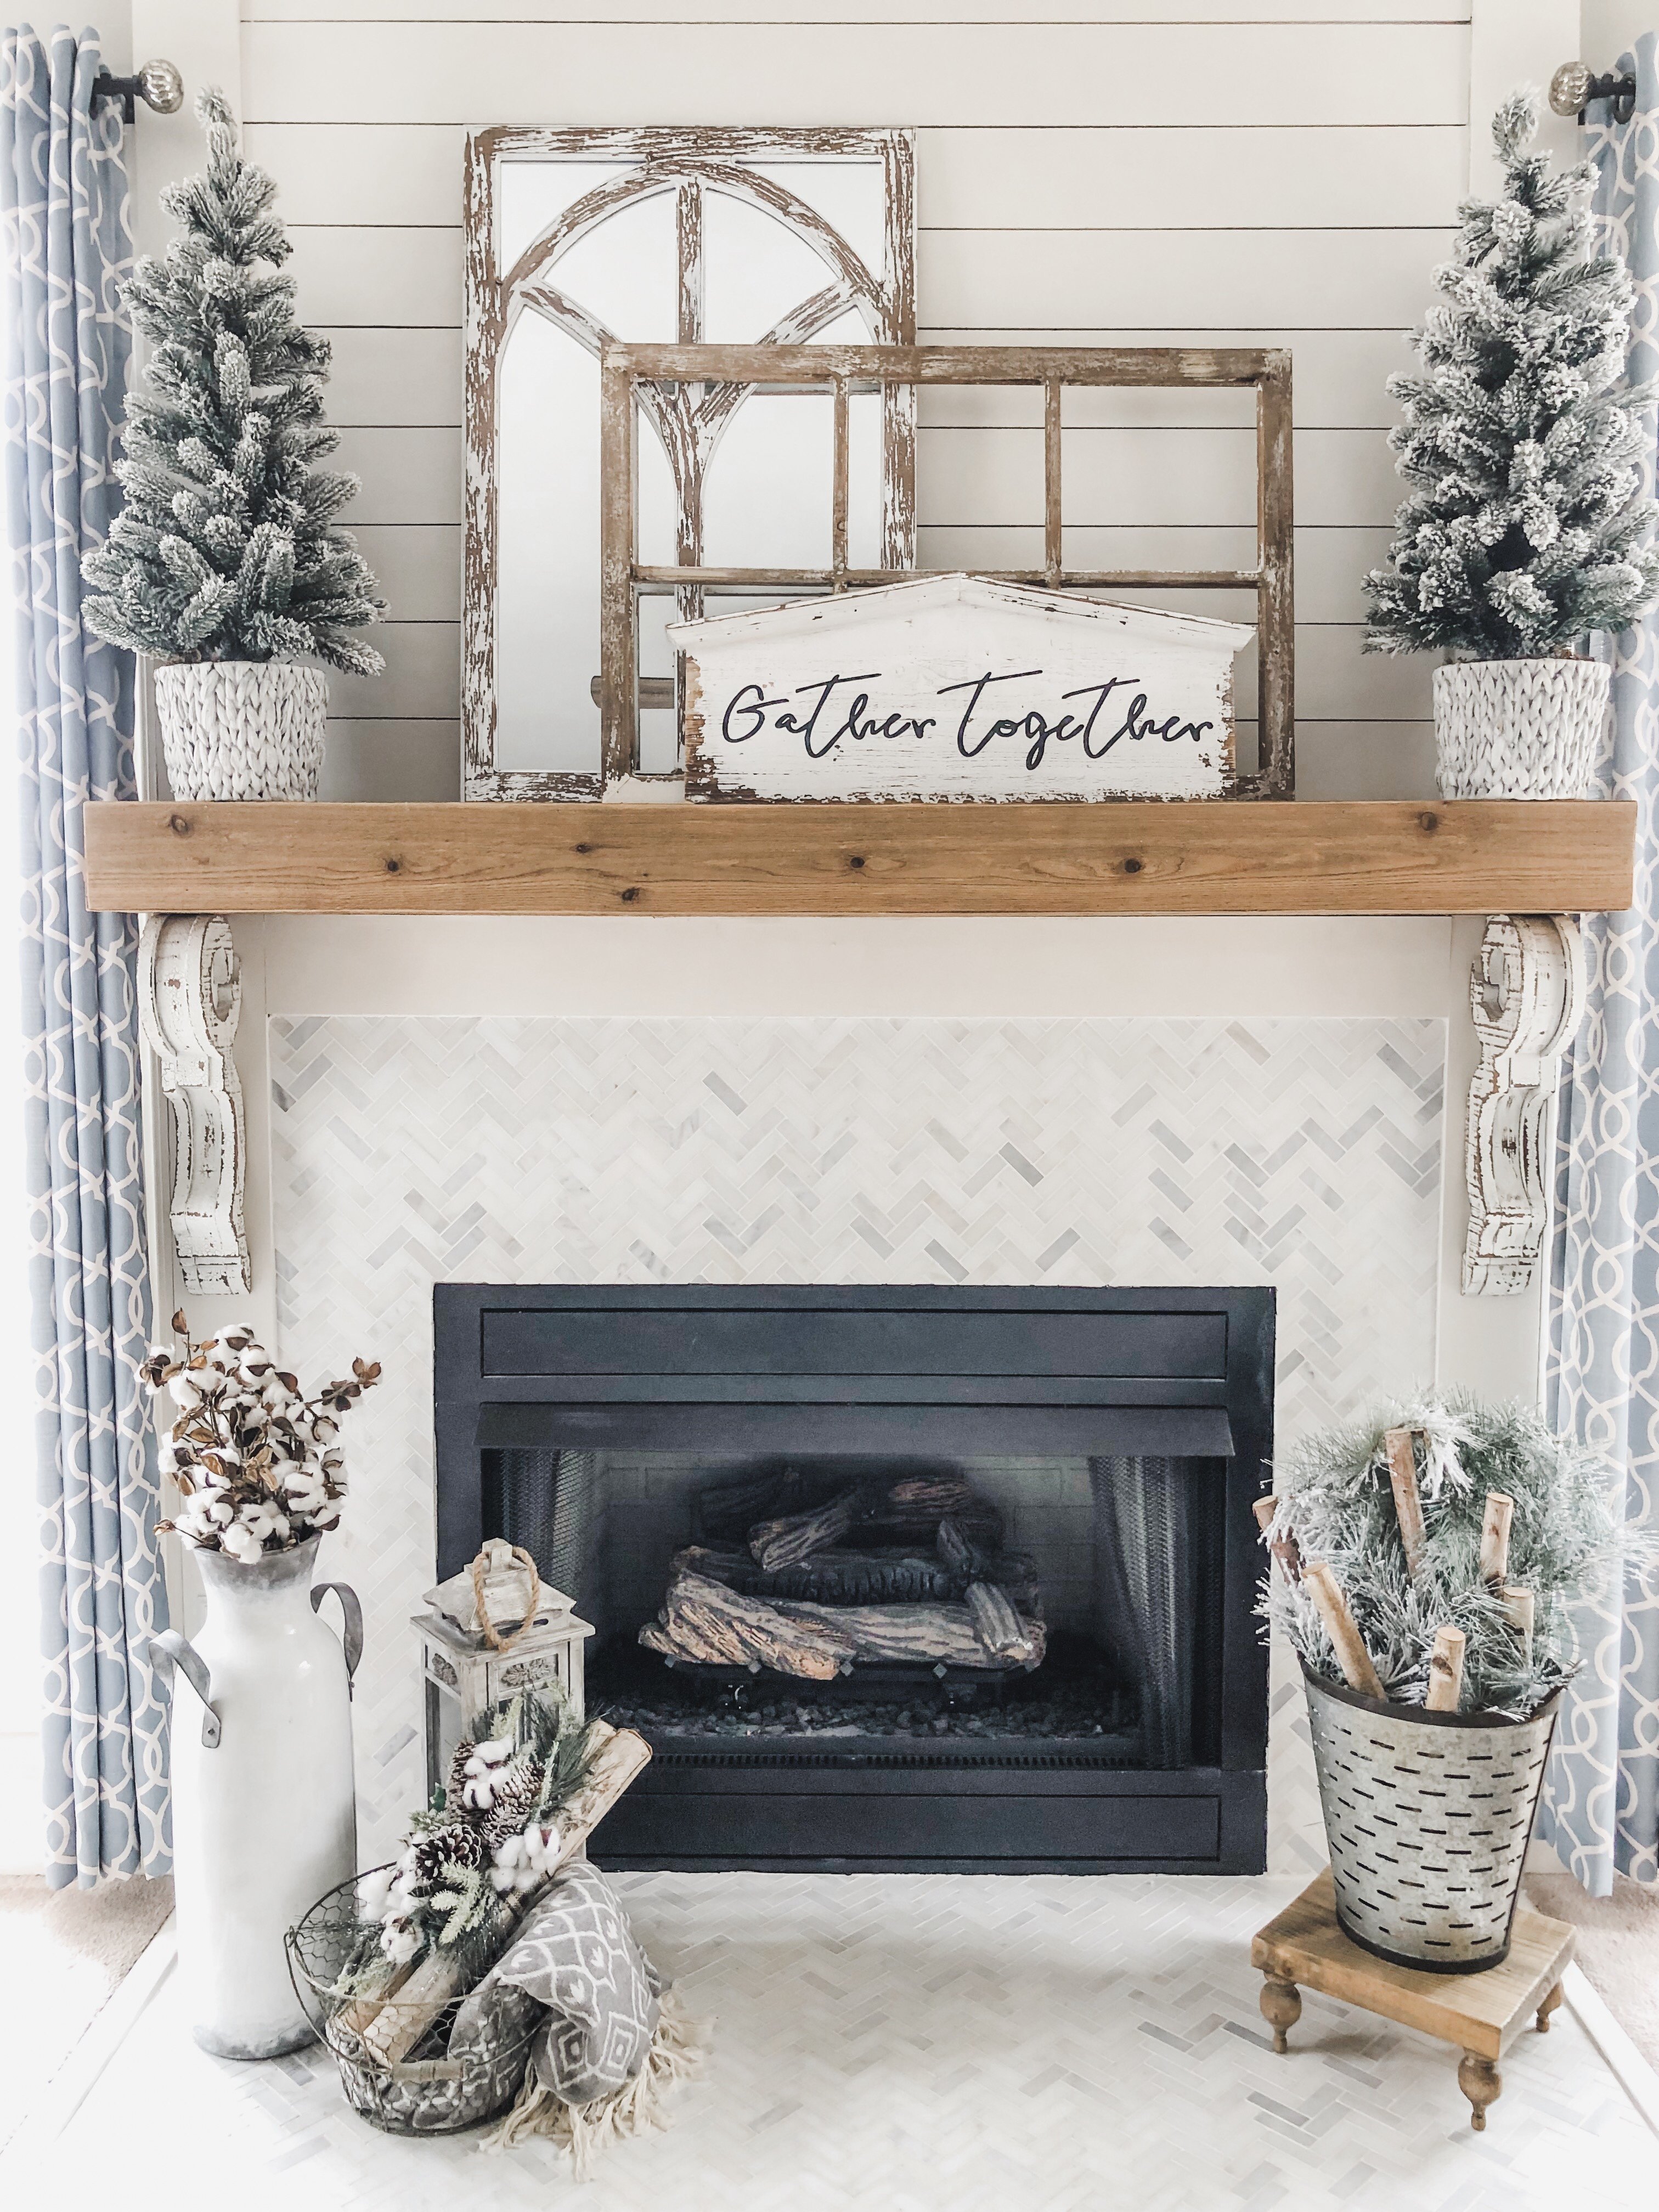 Cozy Winter Living Room decor fireplace with flocked trees and birch ...